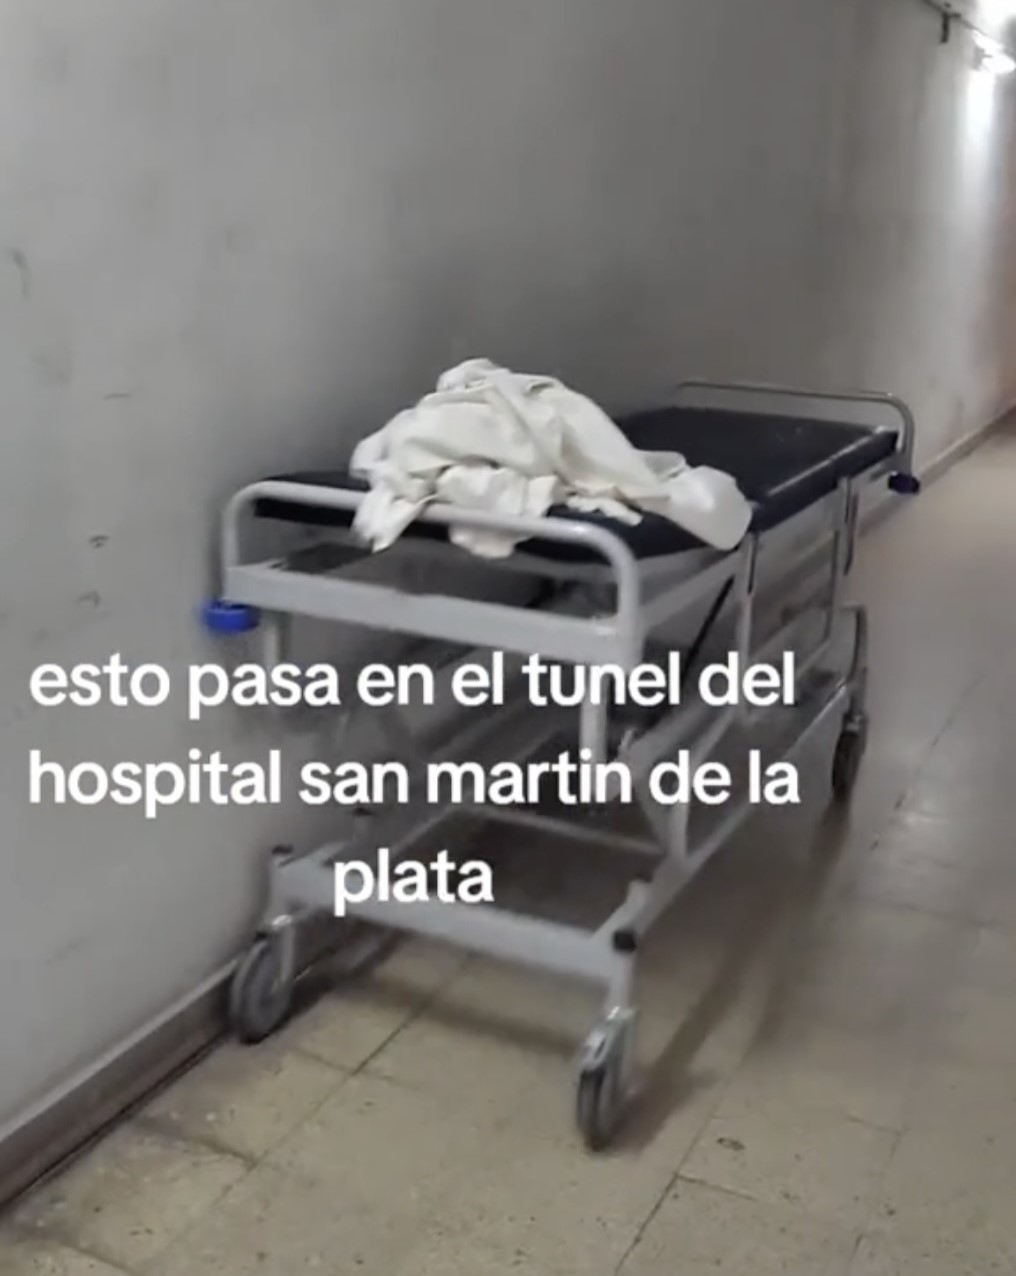 Video grab of the ‘ghost’ pushing along the hospital bed in La Plata, near Buenos Aires, Argentina.